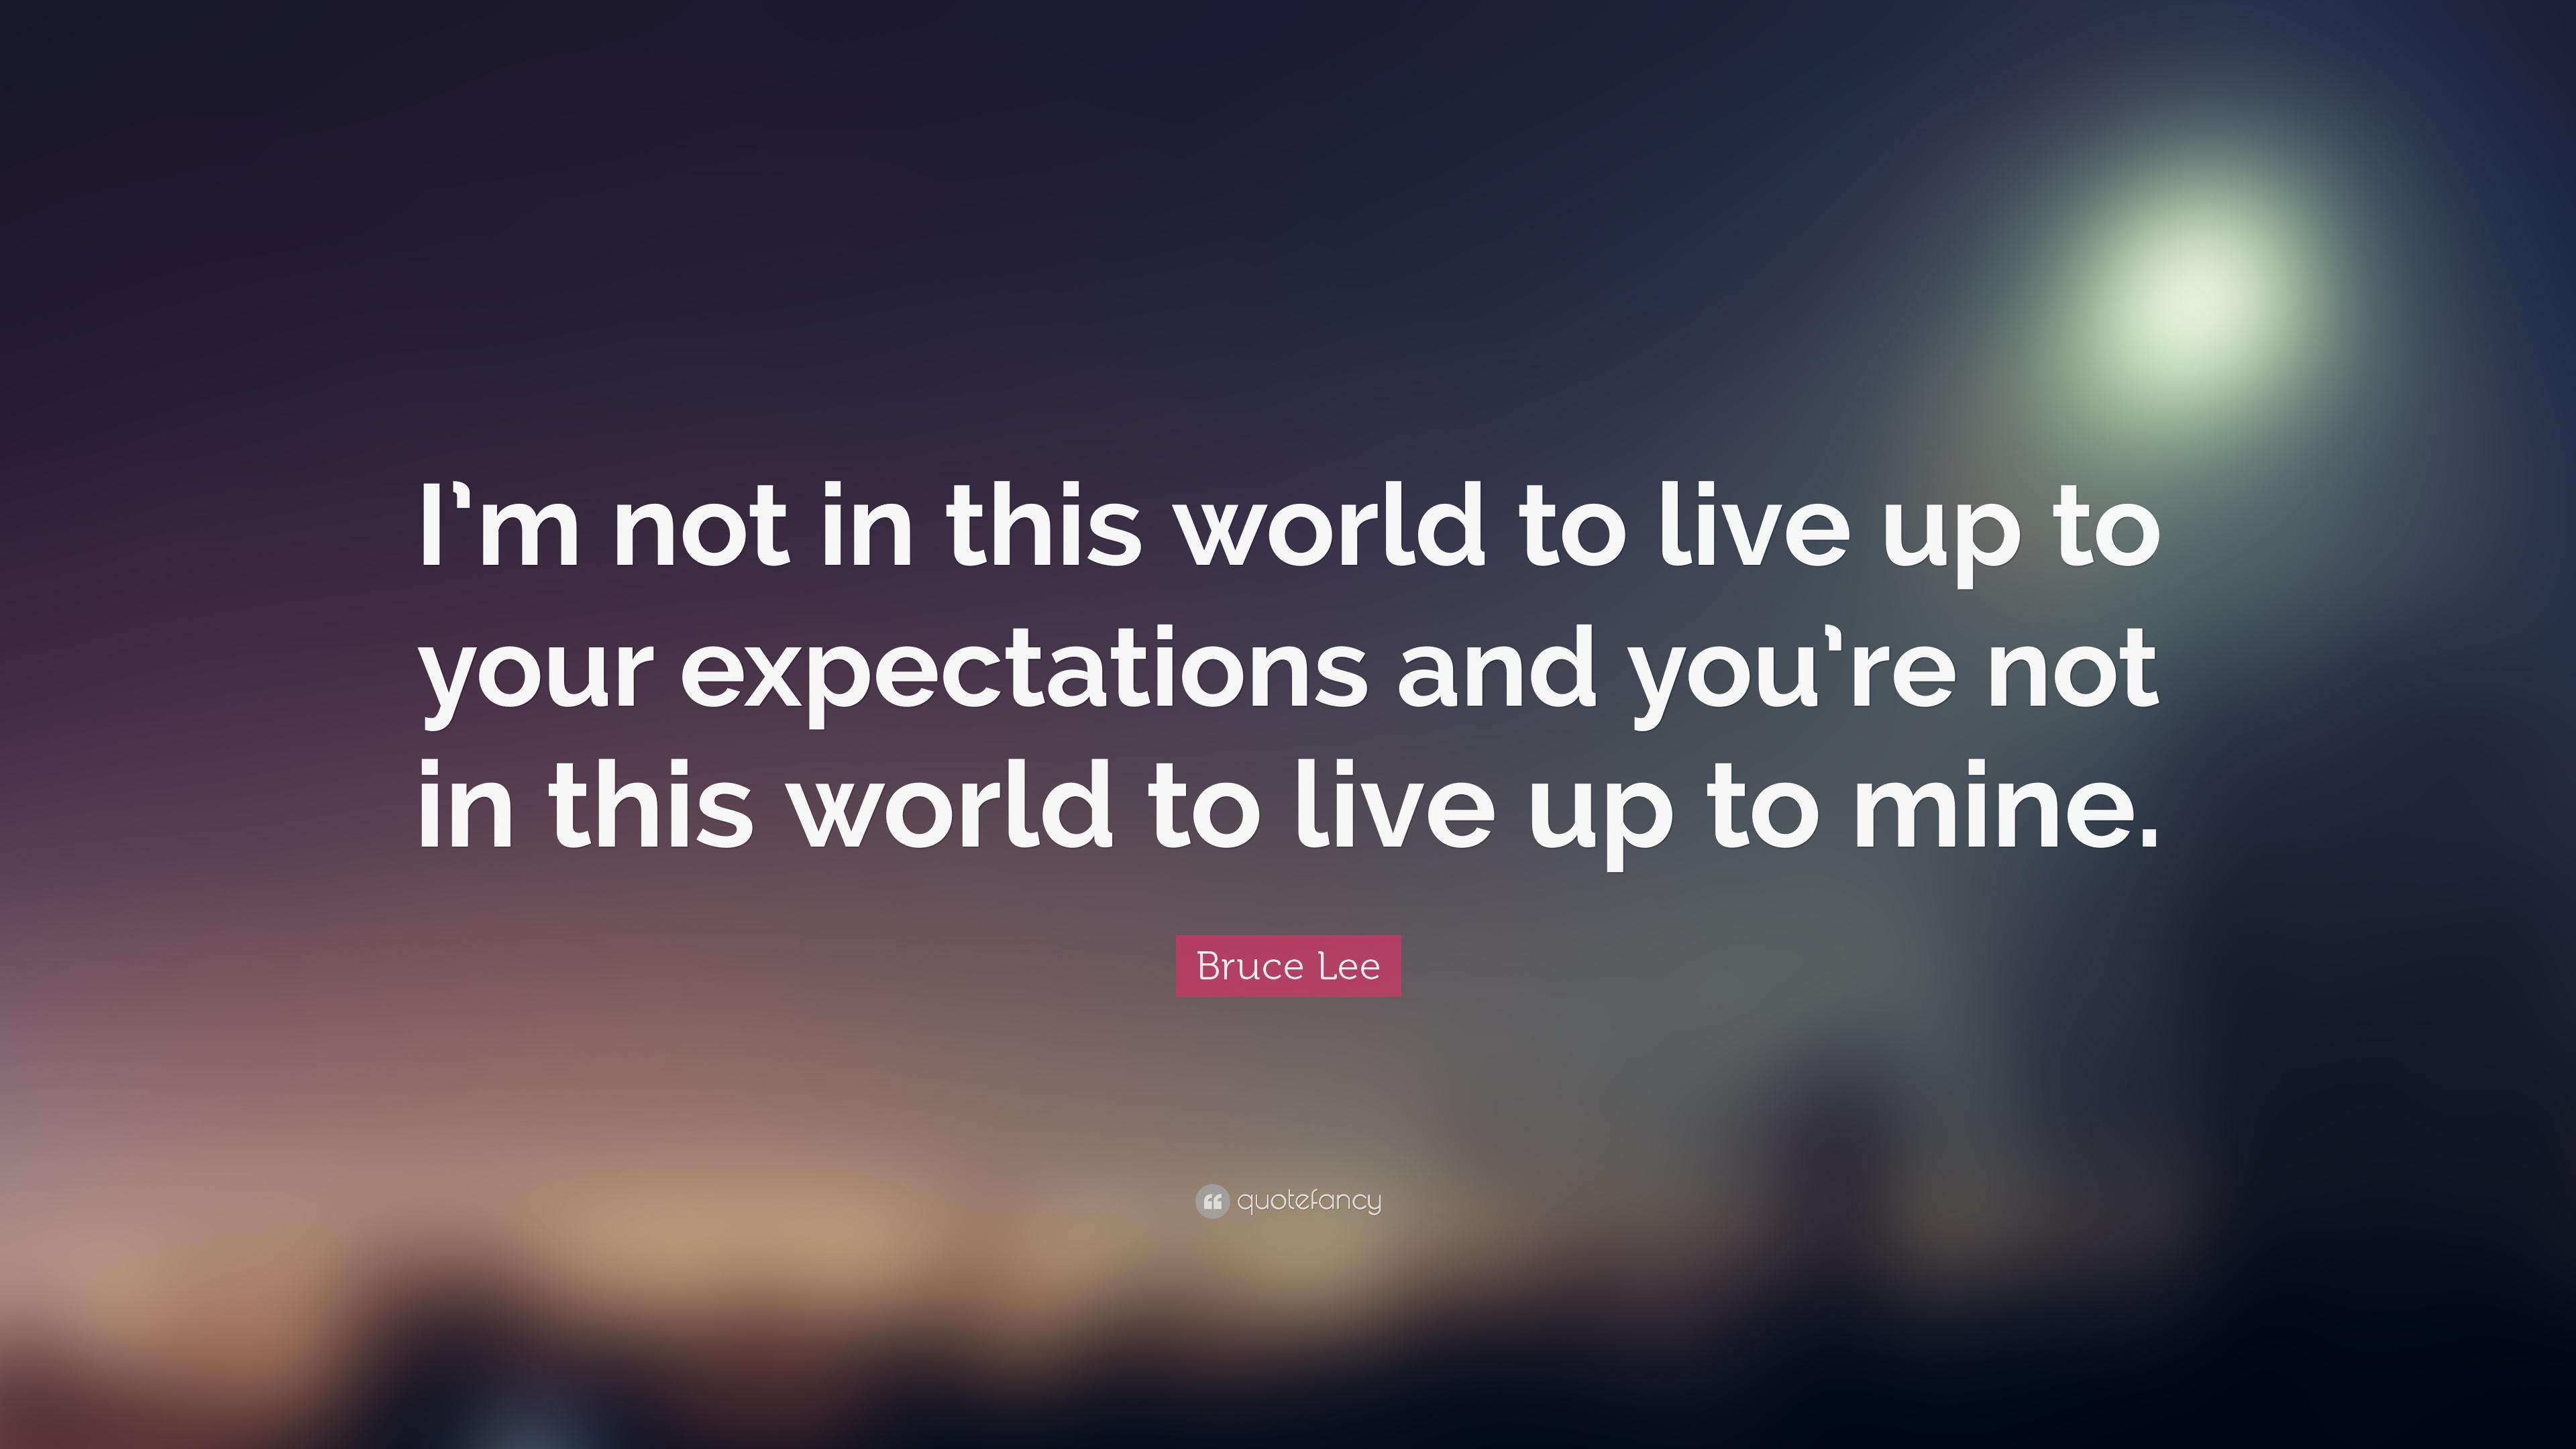 Bruce Lee Quote: “I'm not in this world to live up to your